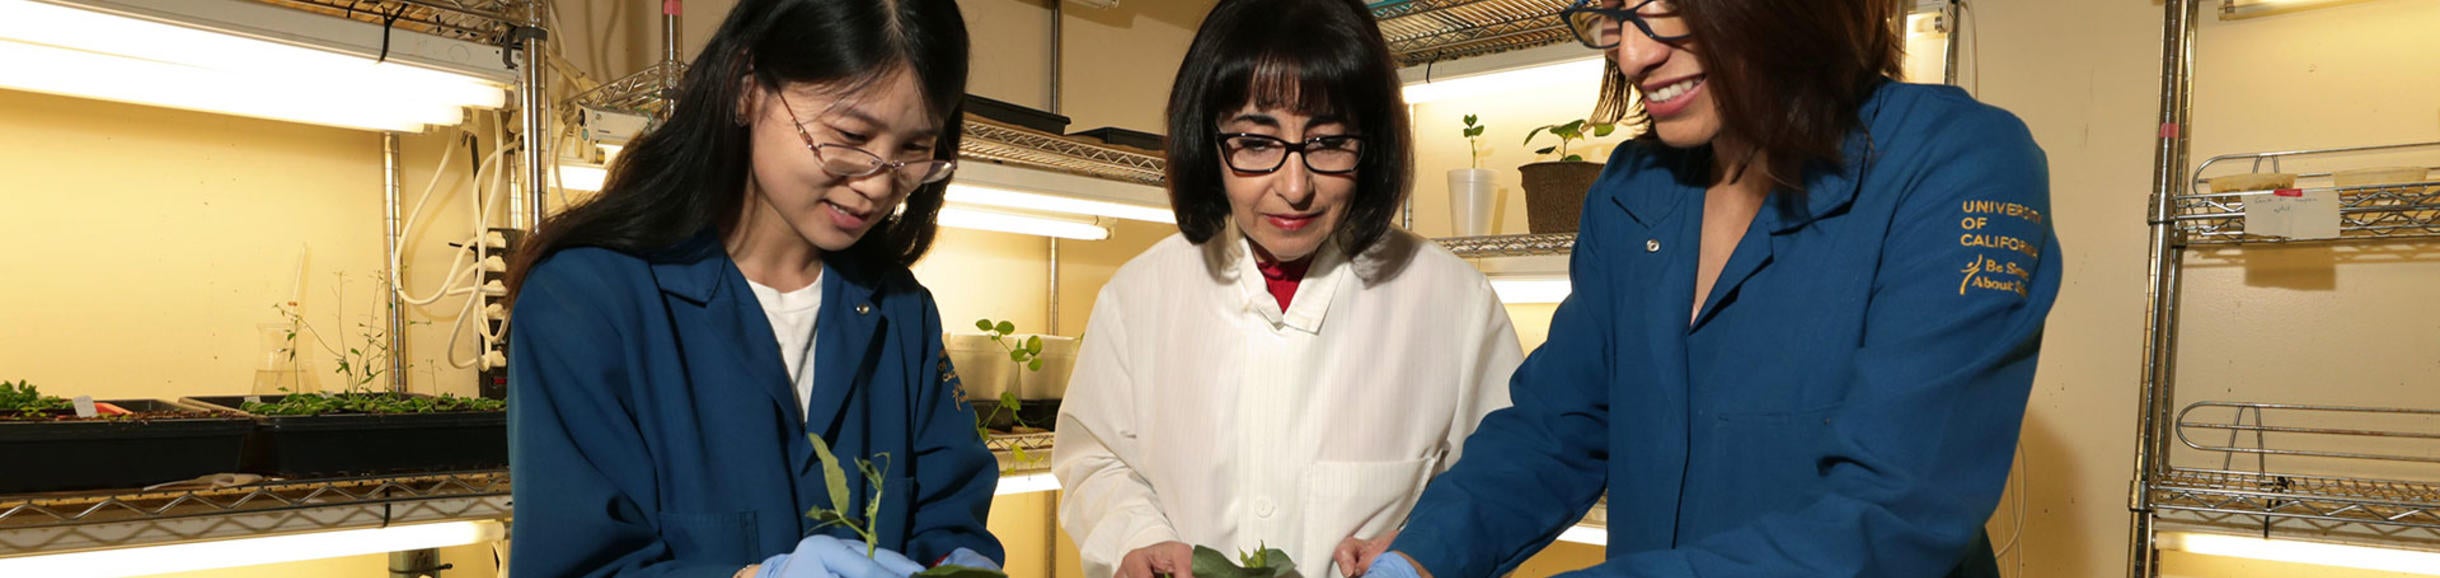 Isgouhi Kaloshian, Professor of Nematology, works with Jiangman He, left, Ph.D. in Genetics, and Damaris Godinez-Vidal, Ph.D. in Plant Pathology, as they tend to plants in the Kaloshian lab on May 30, 2019 in the Genomics building.